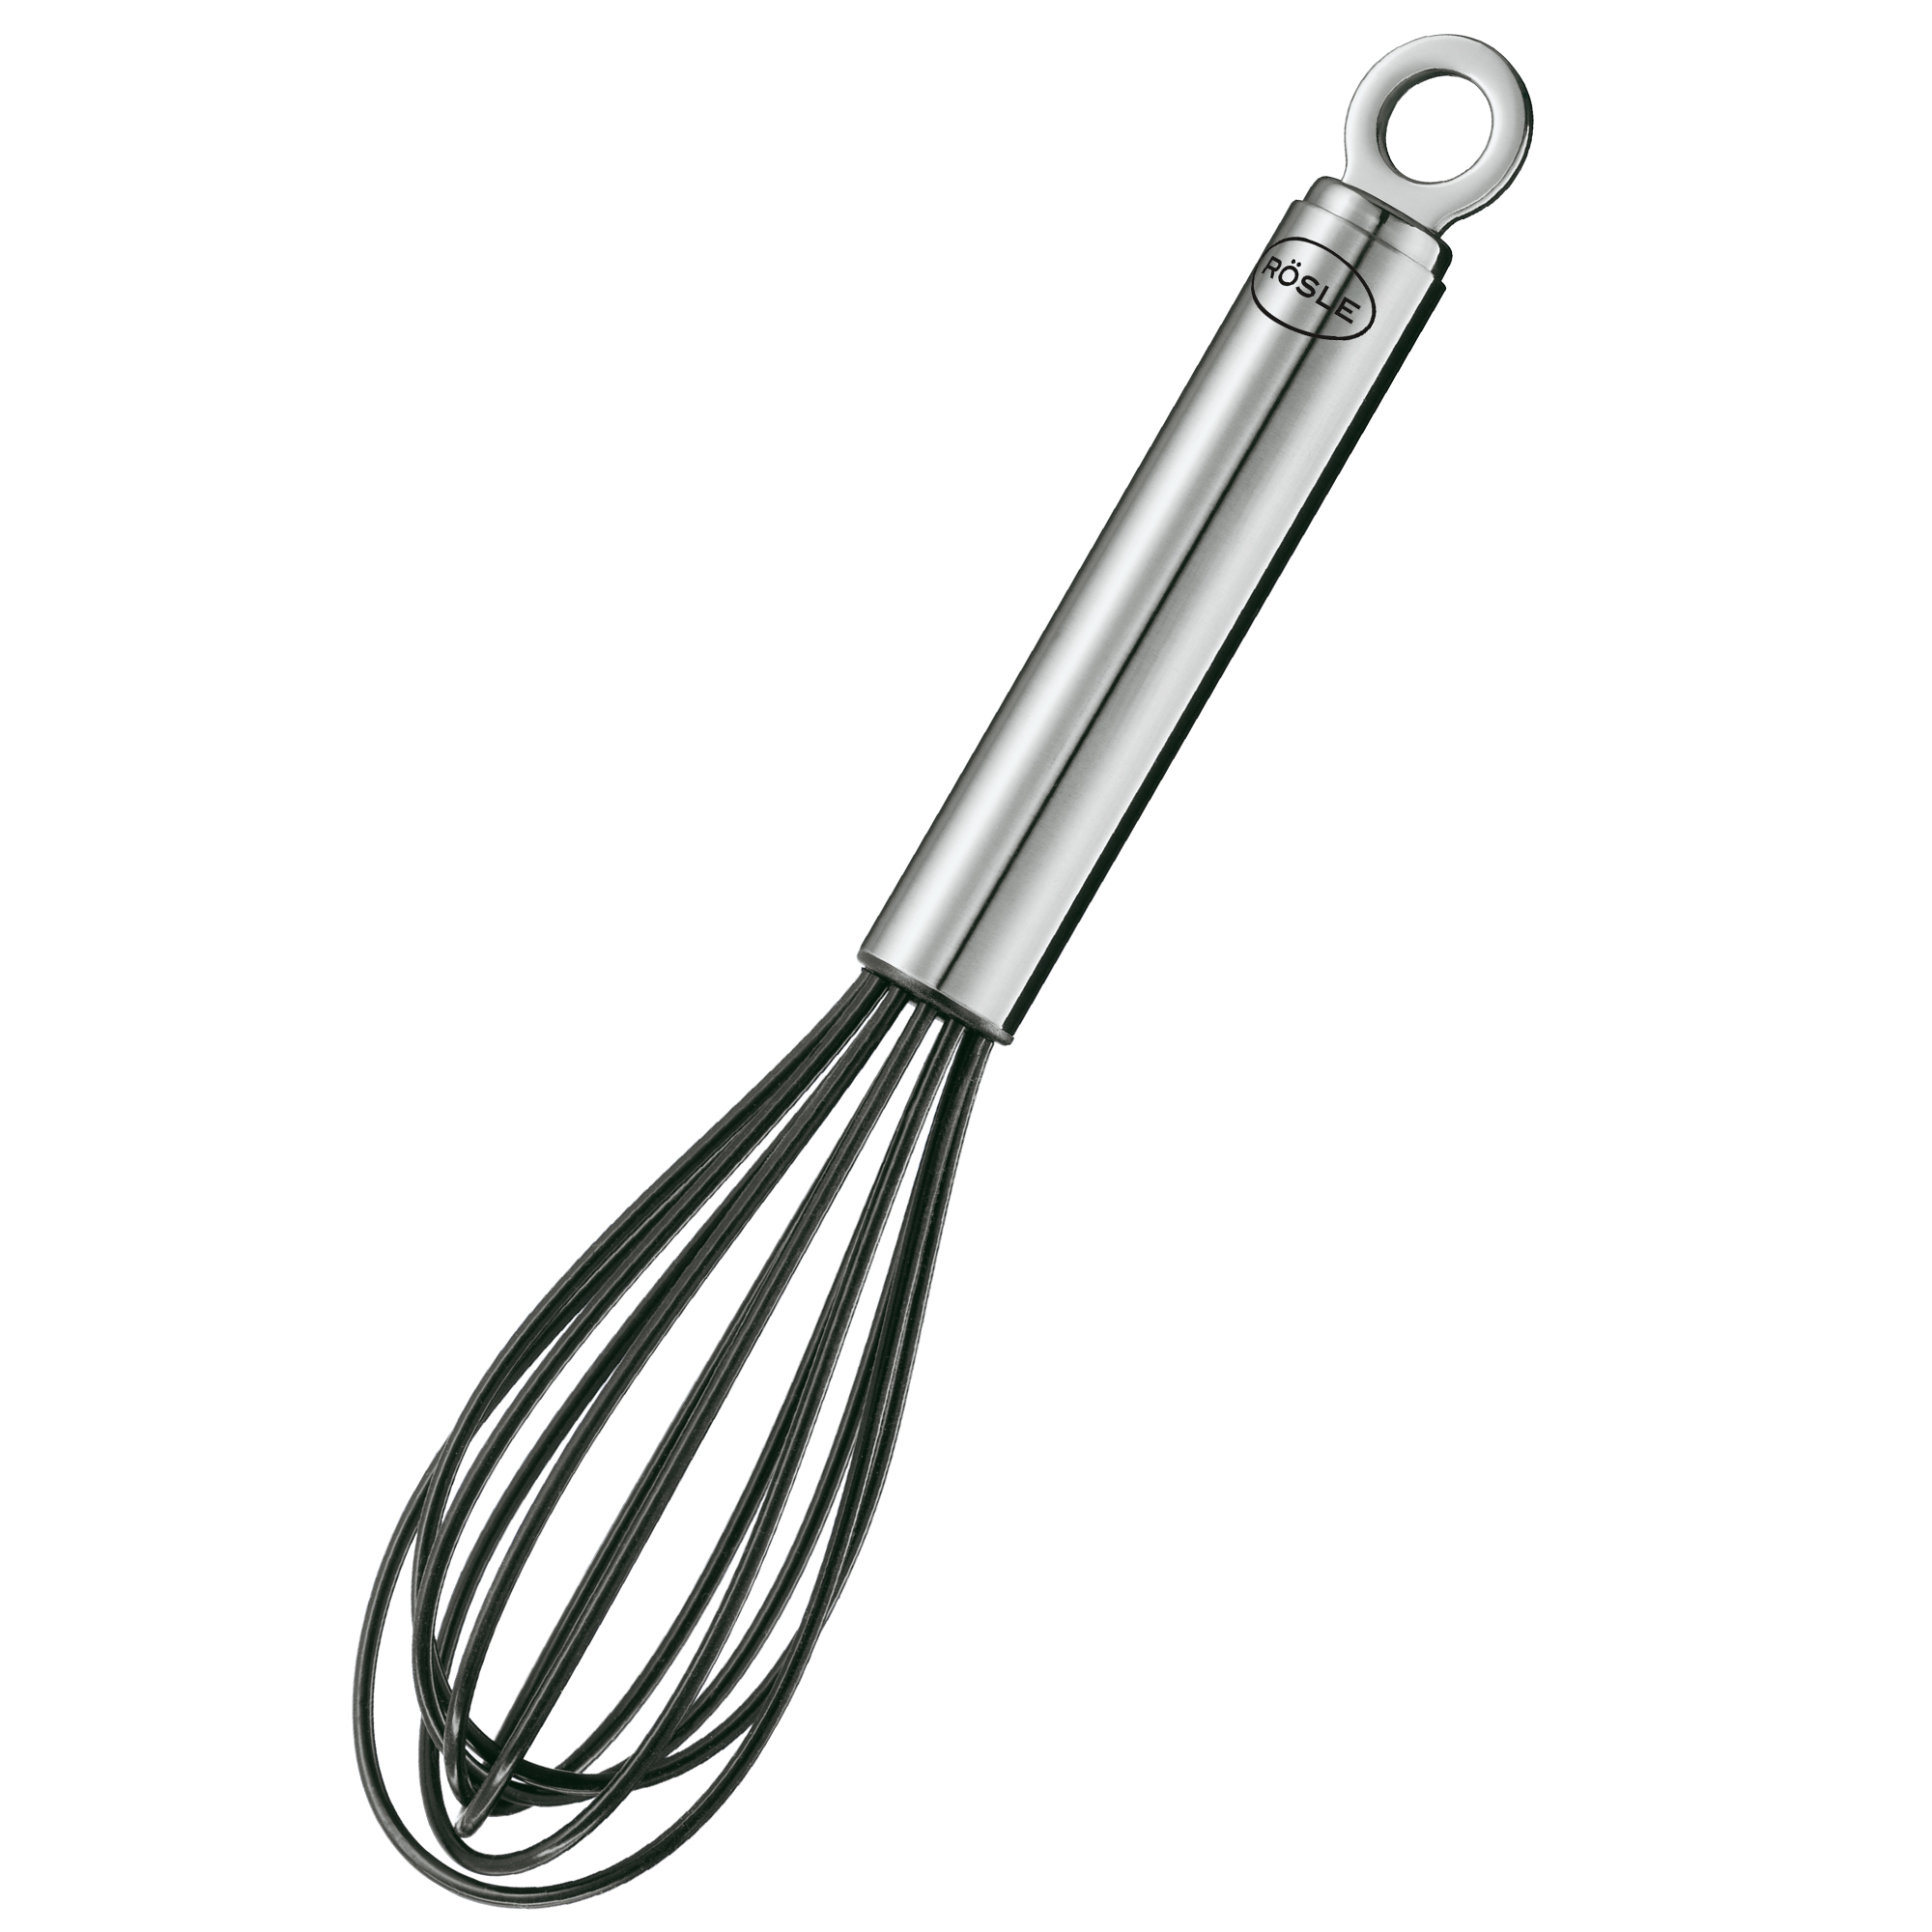 Egg Whisk silicone 27 cm|10.6 in.